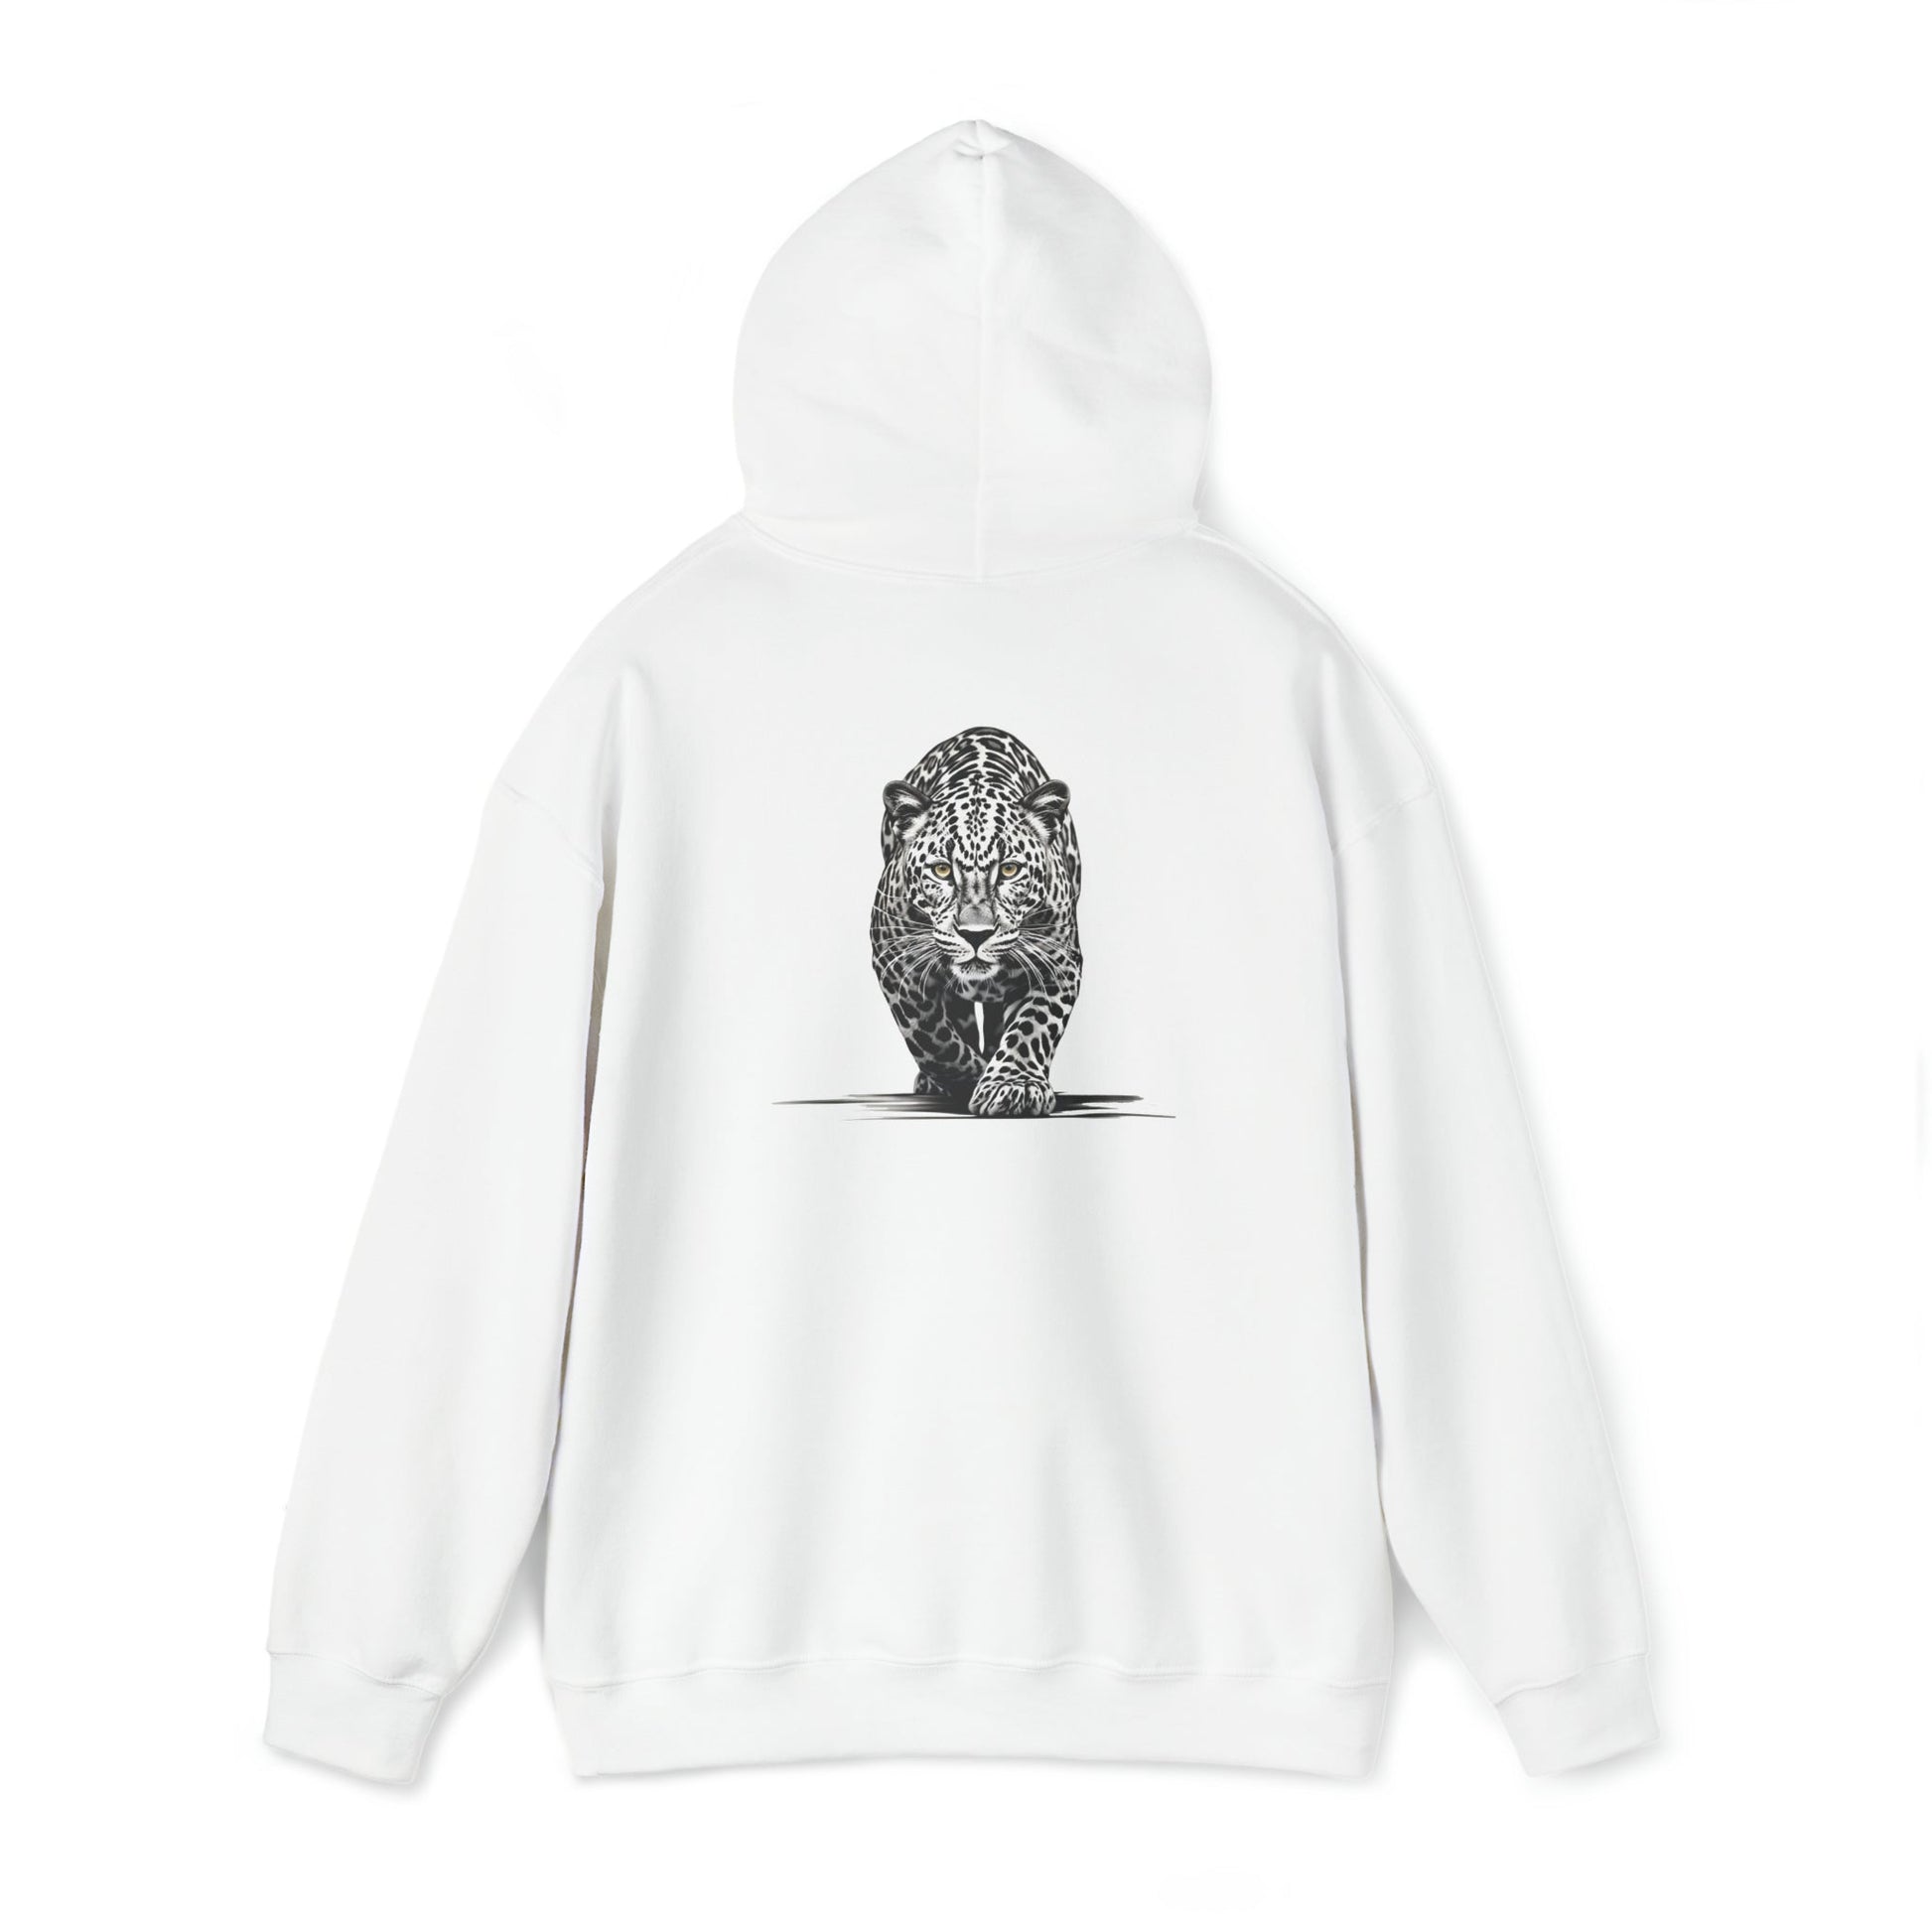 Snow Leopard Full Zip Hoodie or Pullover Hoodie with Spotted Leopard, Wild Life Shirt - FlooredByArt